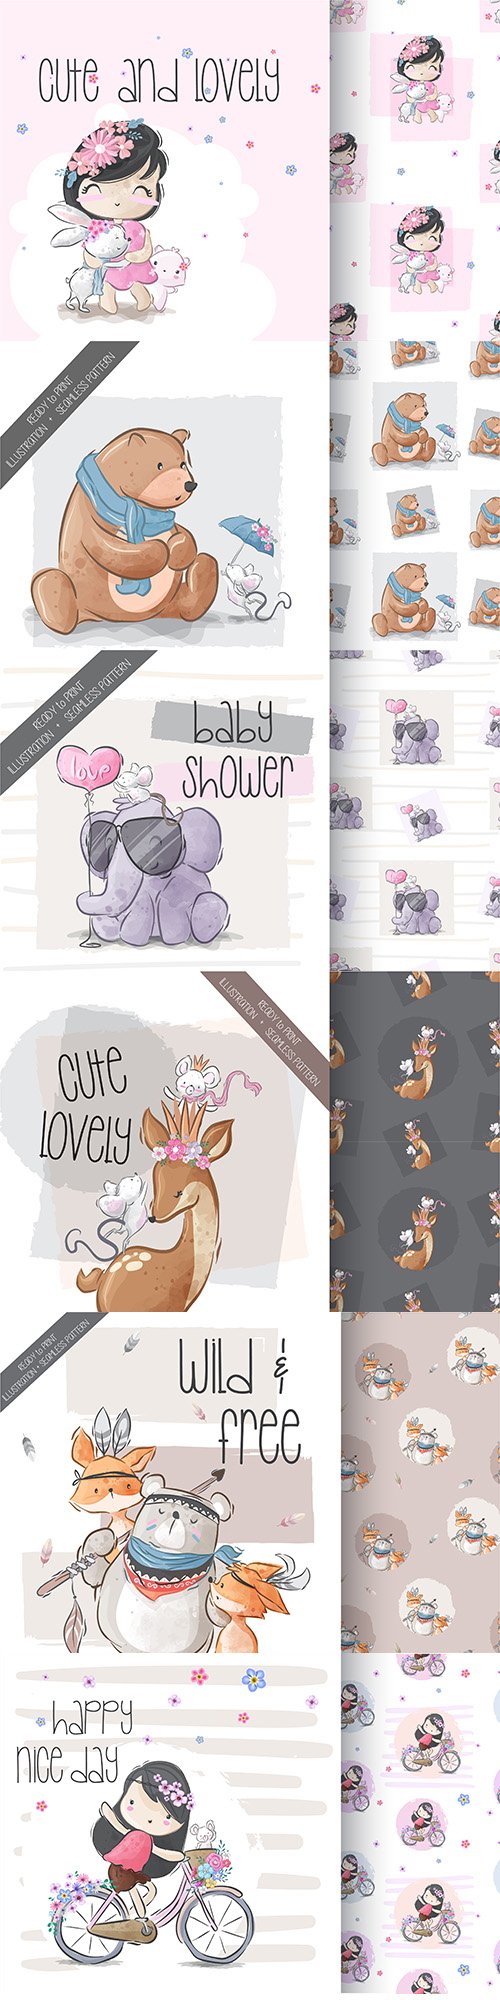 Cute baby and funny animal illustrations seamless pattern